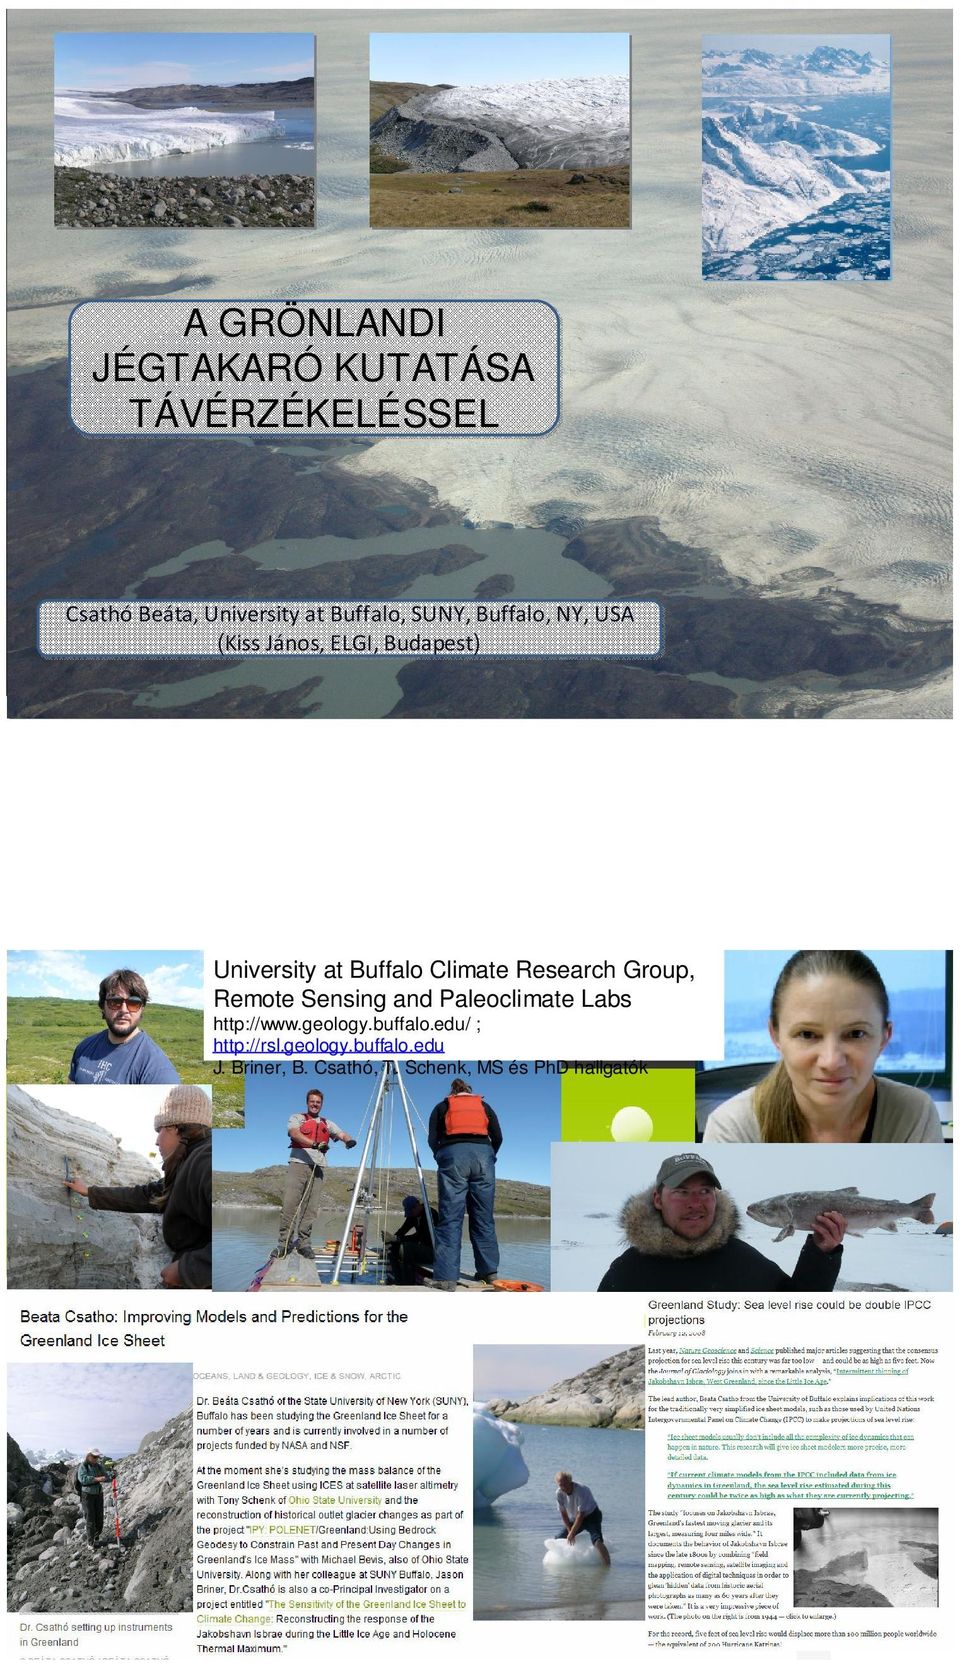 University at Buffalo Climate Research Group, Remote Sensing and Paleoclimate Labs http://www.geology.buffalo.